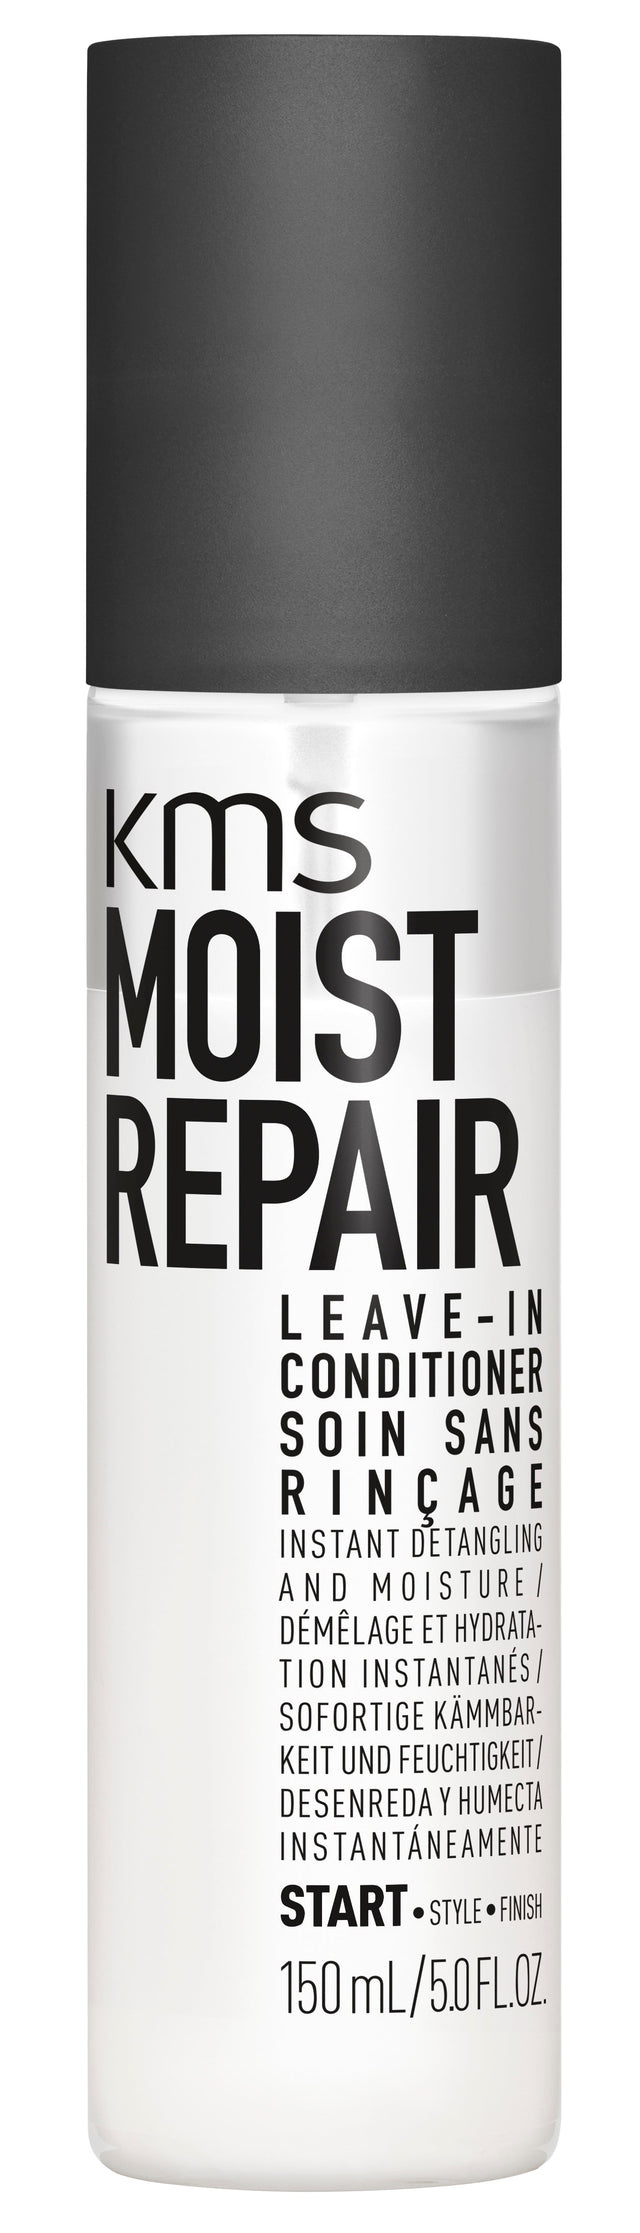 MoistRepair Leave-In Conditioner Image thumbnail